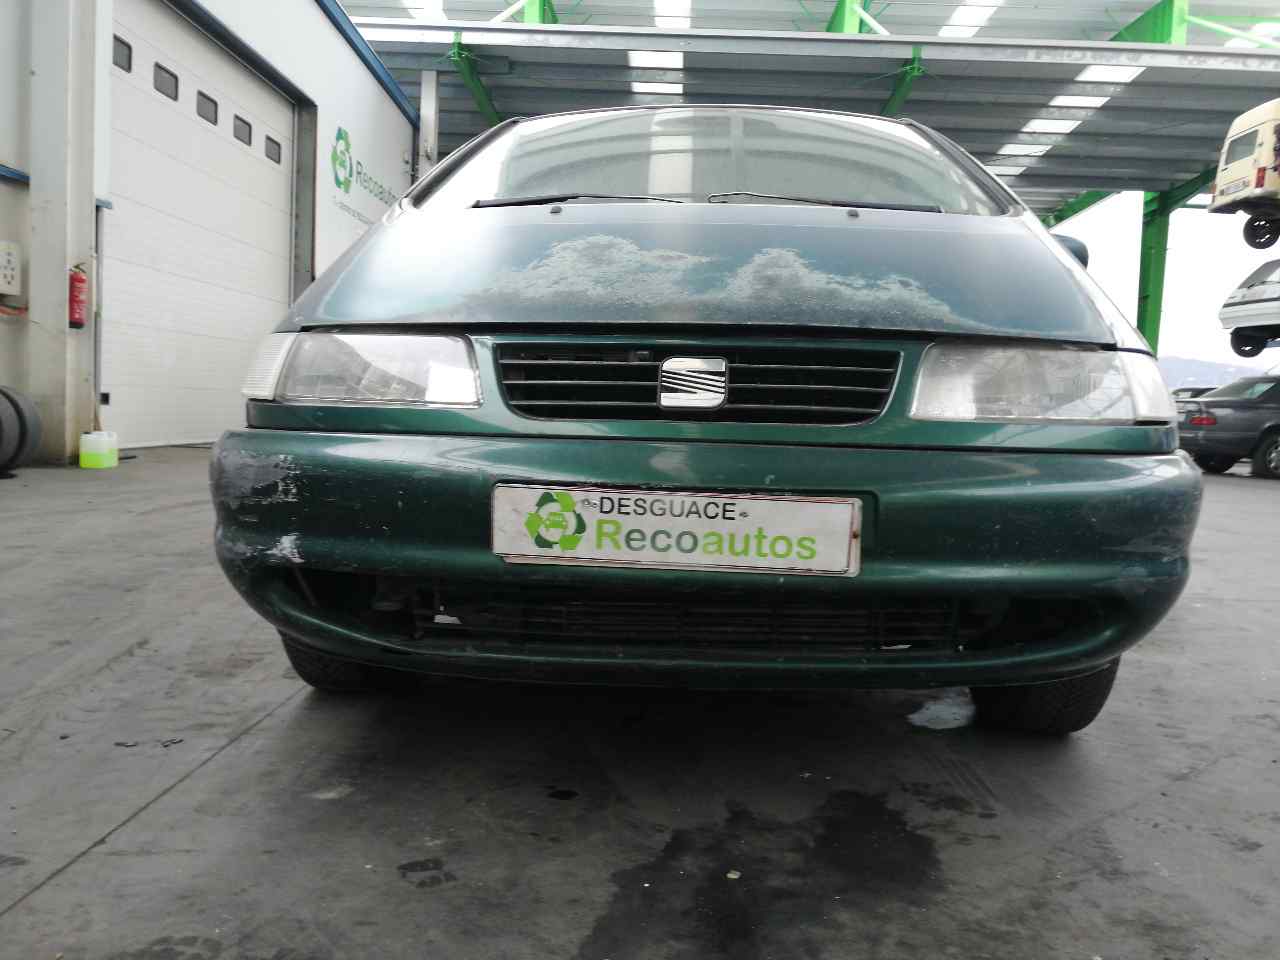 SEAT Alhambra 1 generation (1996-2010) Other Interior Parts 7M0837020A, 5PUERTAS 19877730